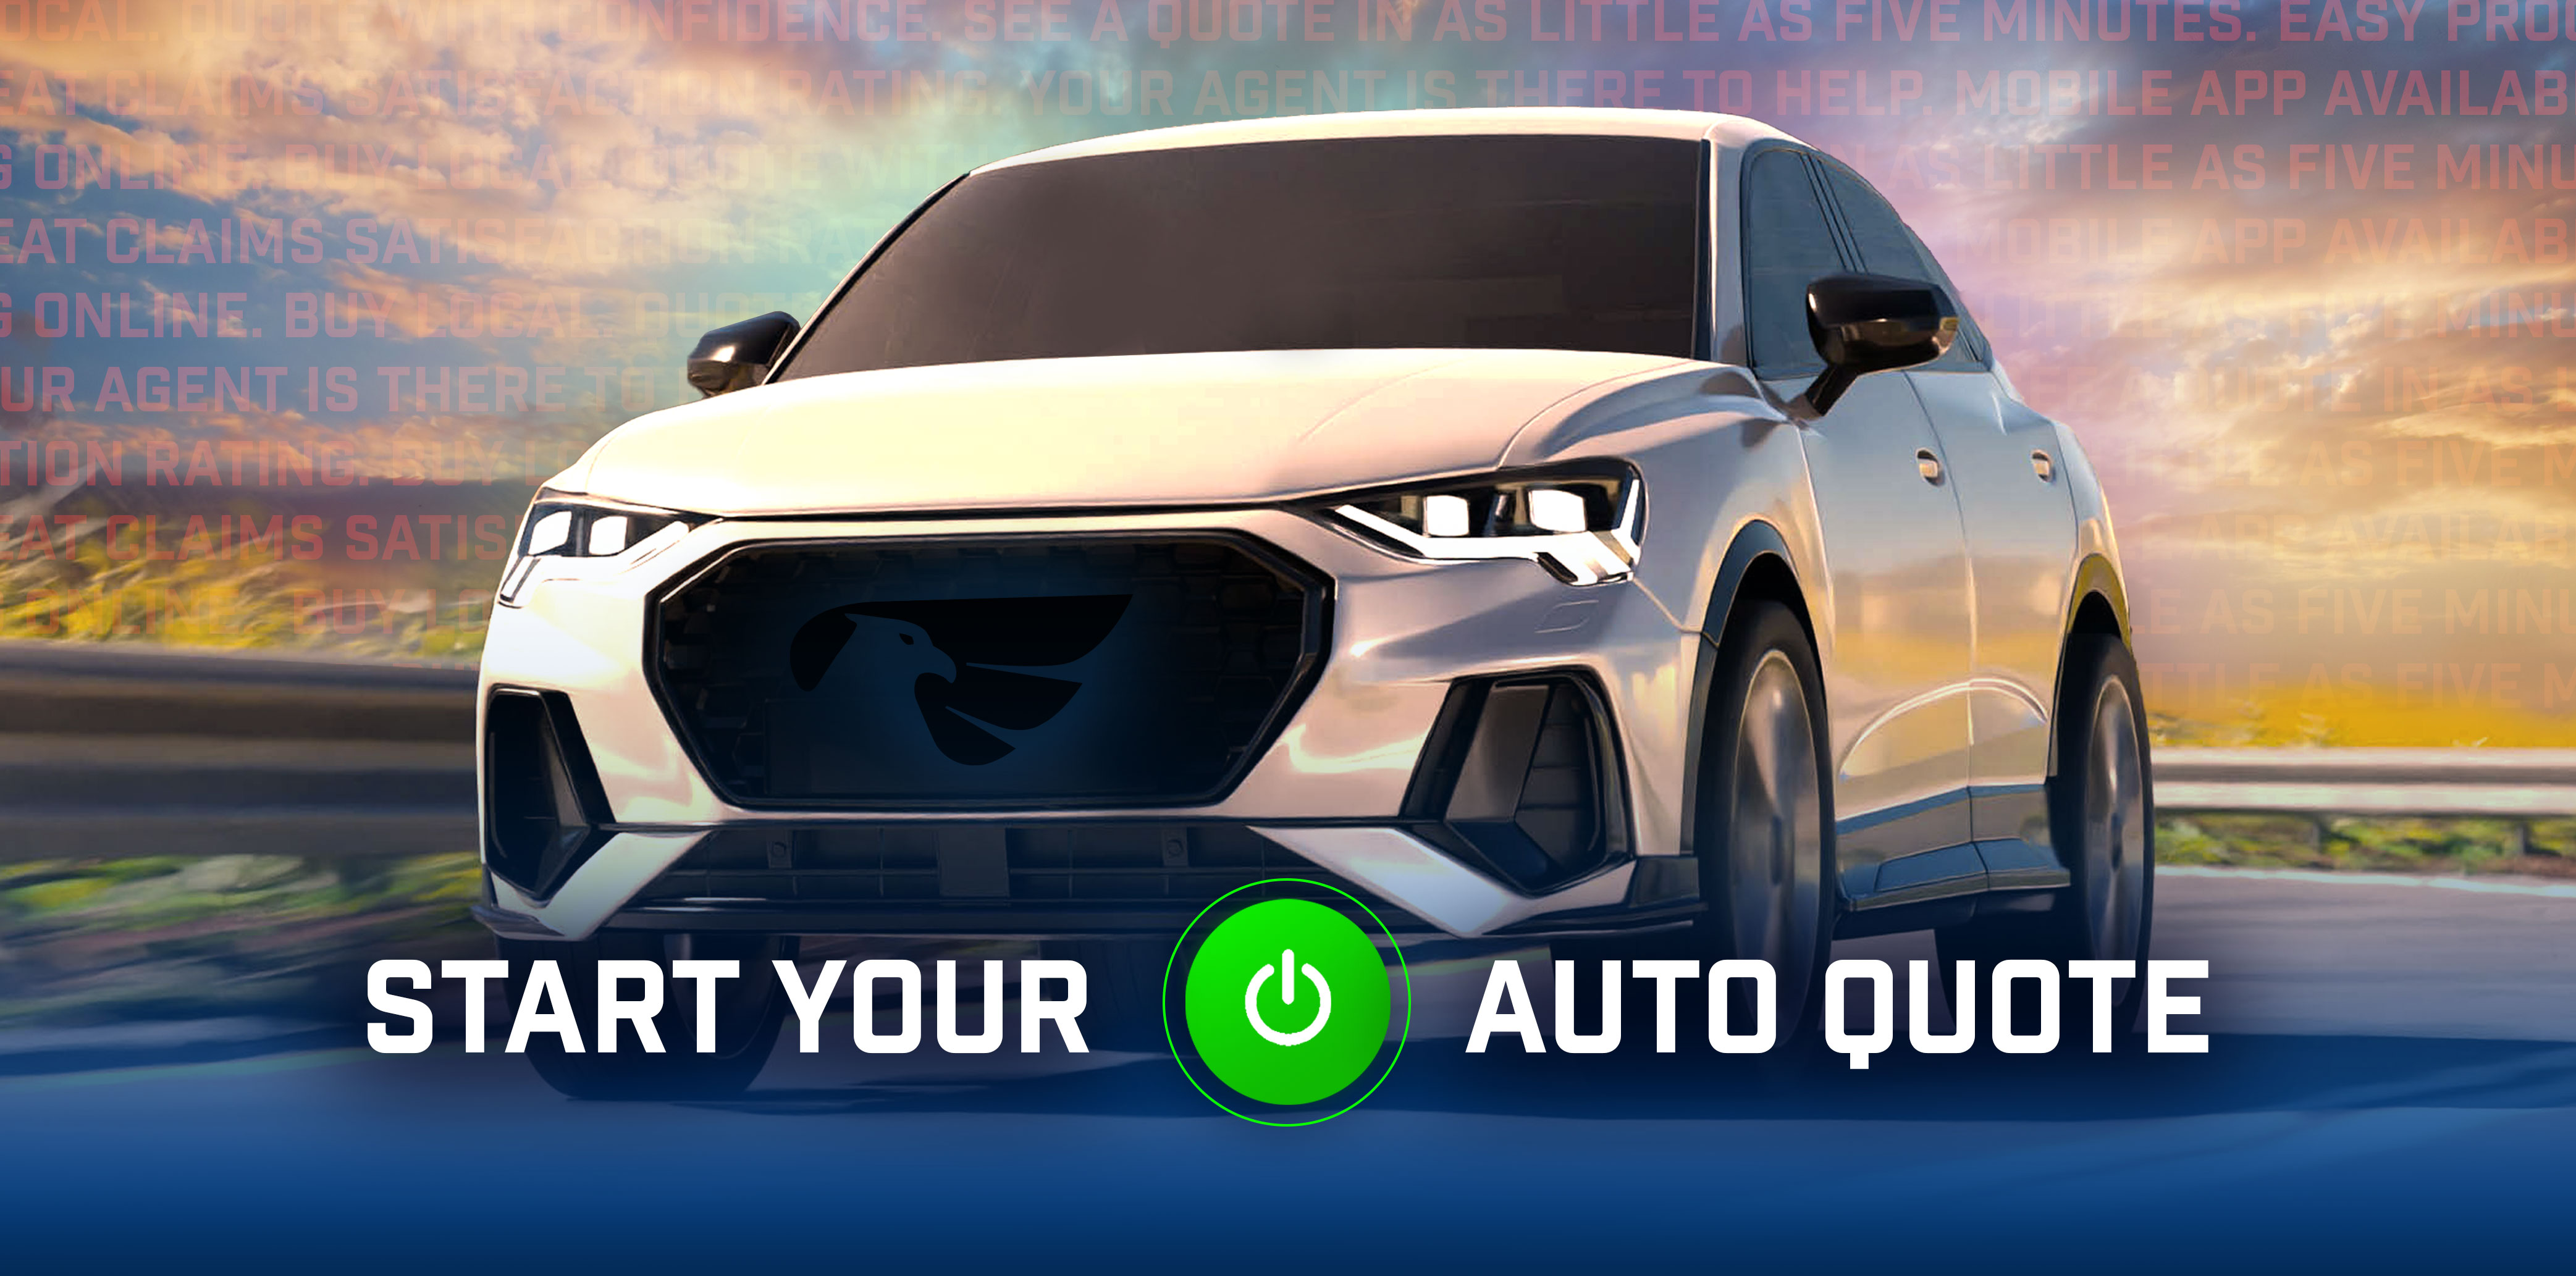 Get an auto quote today!